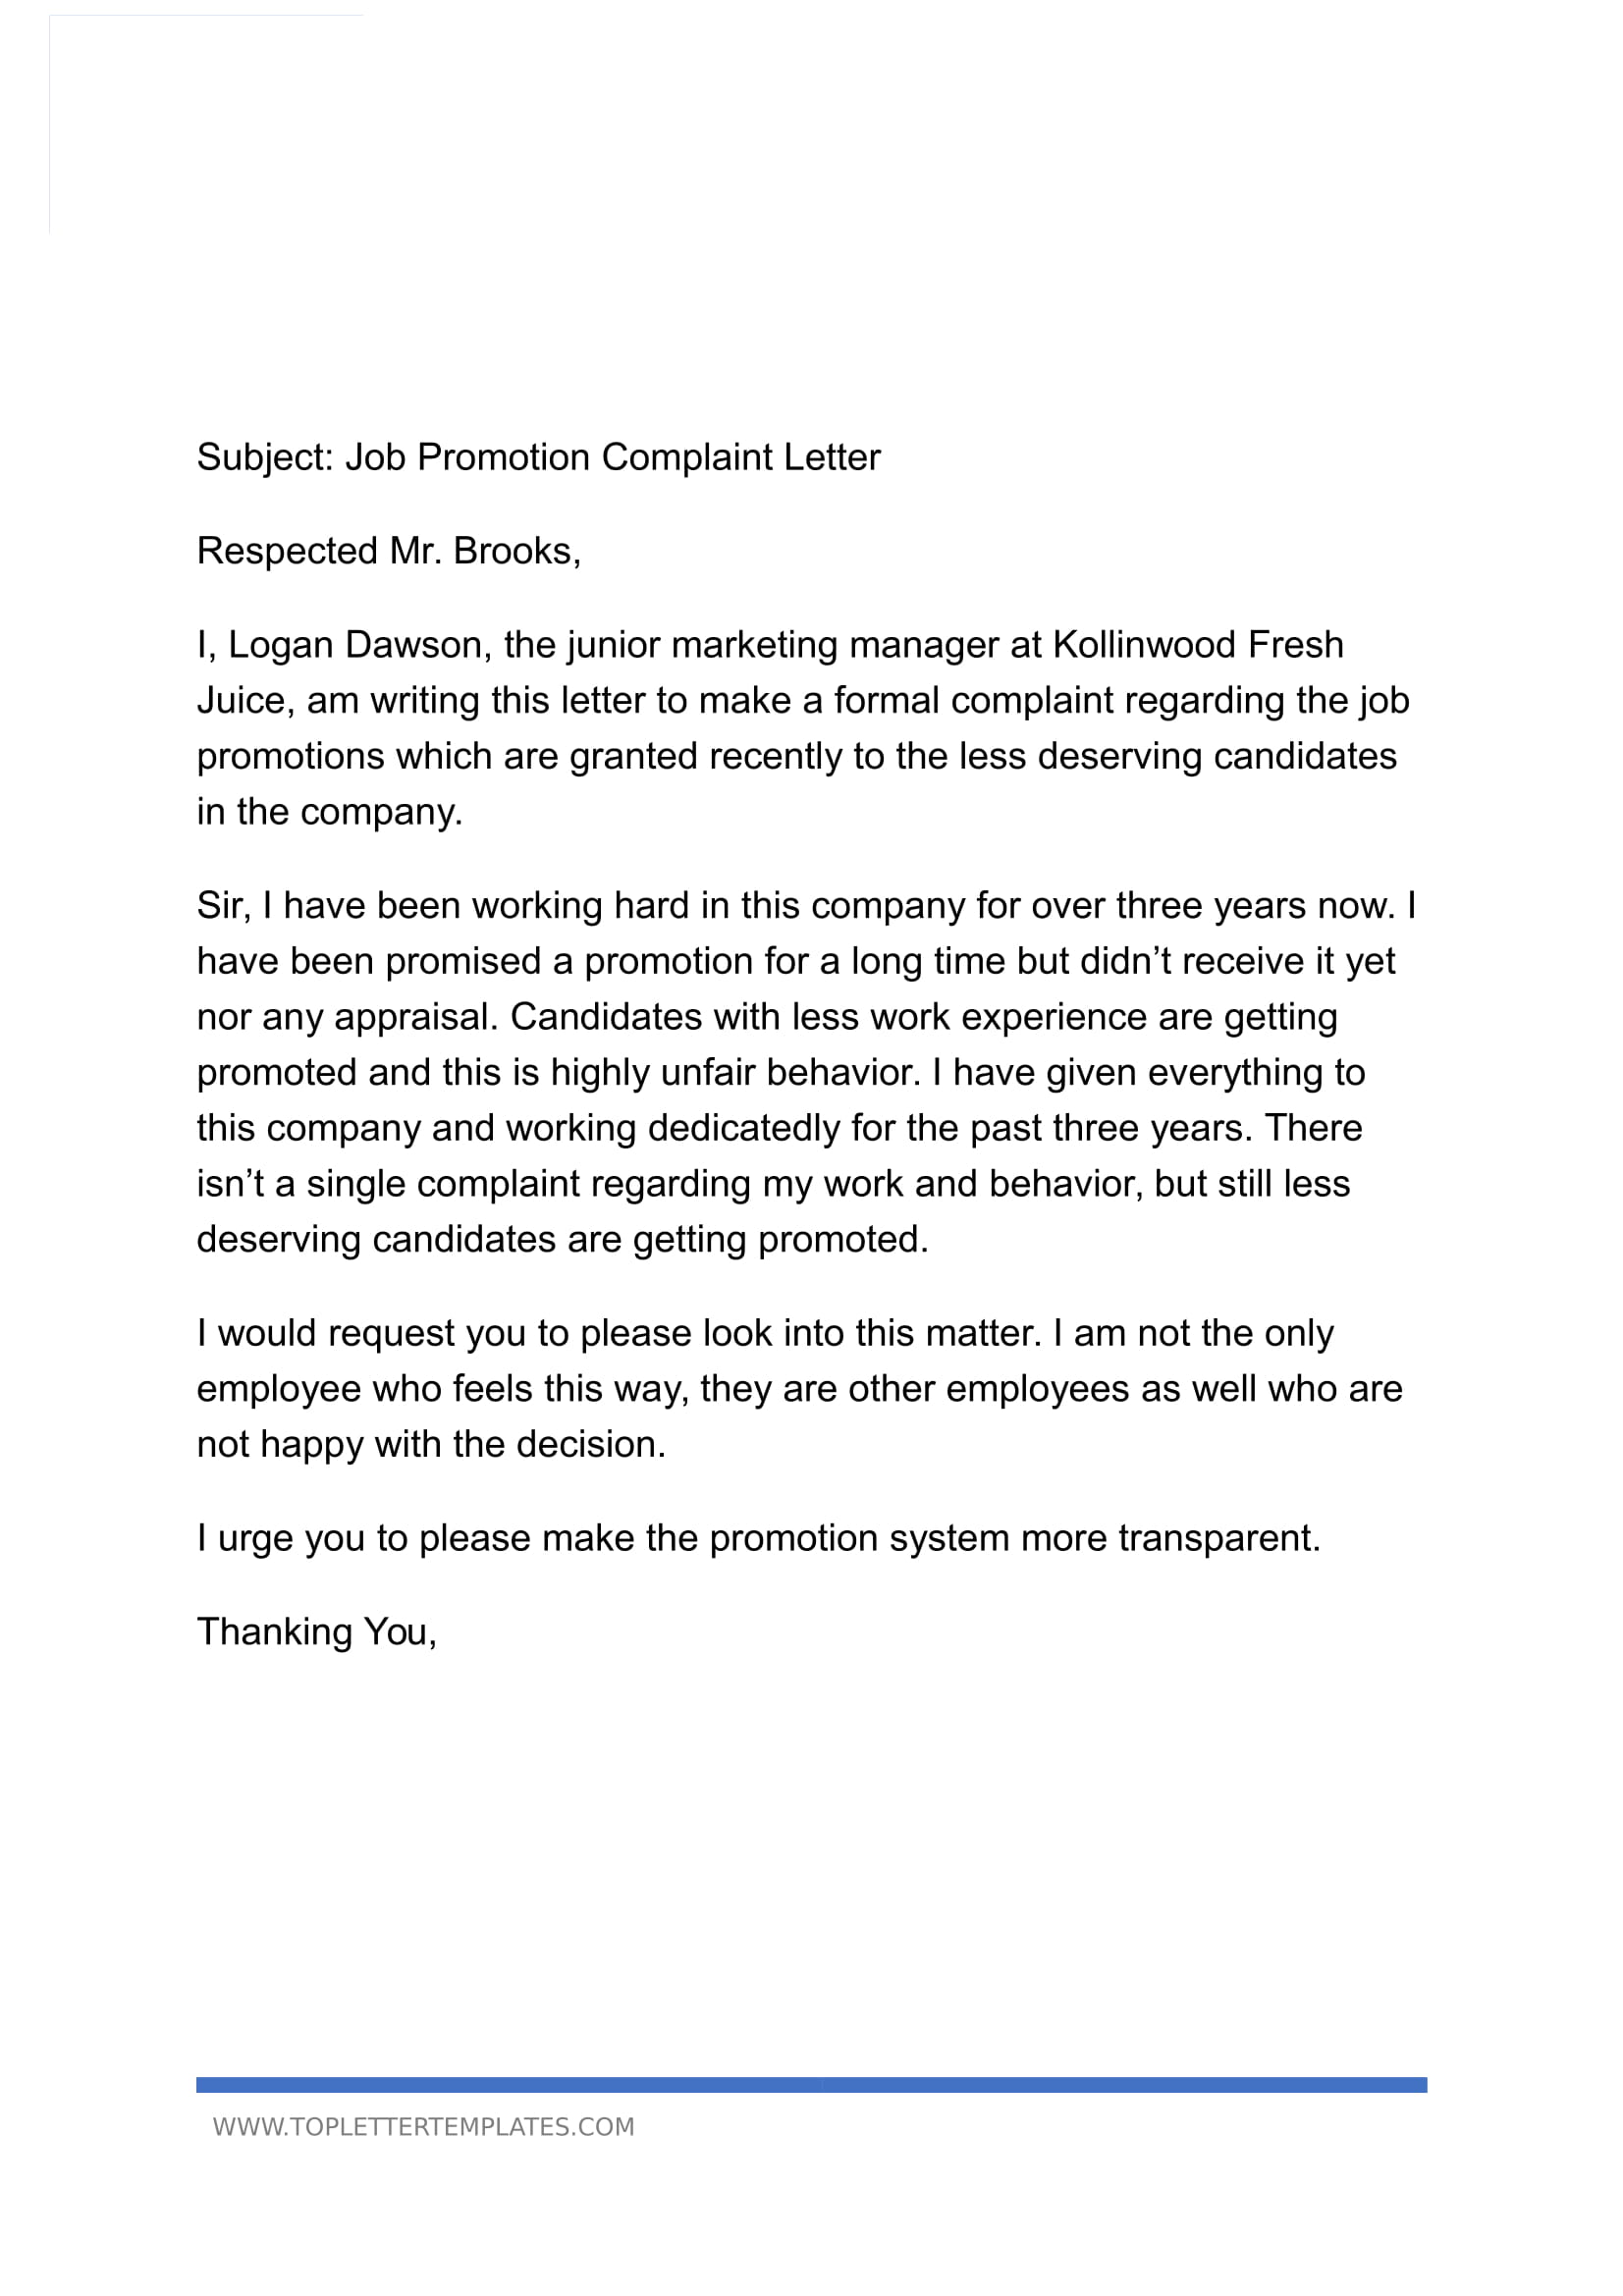 Professional Complaint Letter Template from toplettertemplates.com